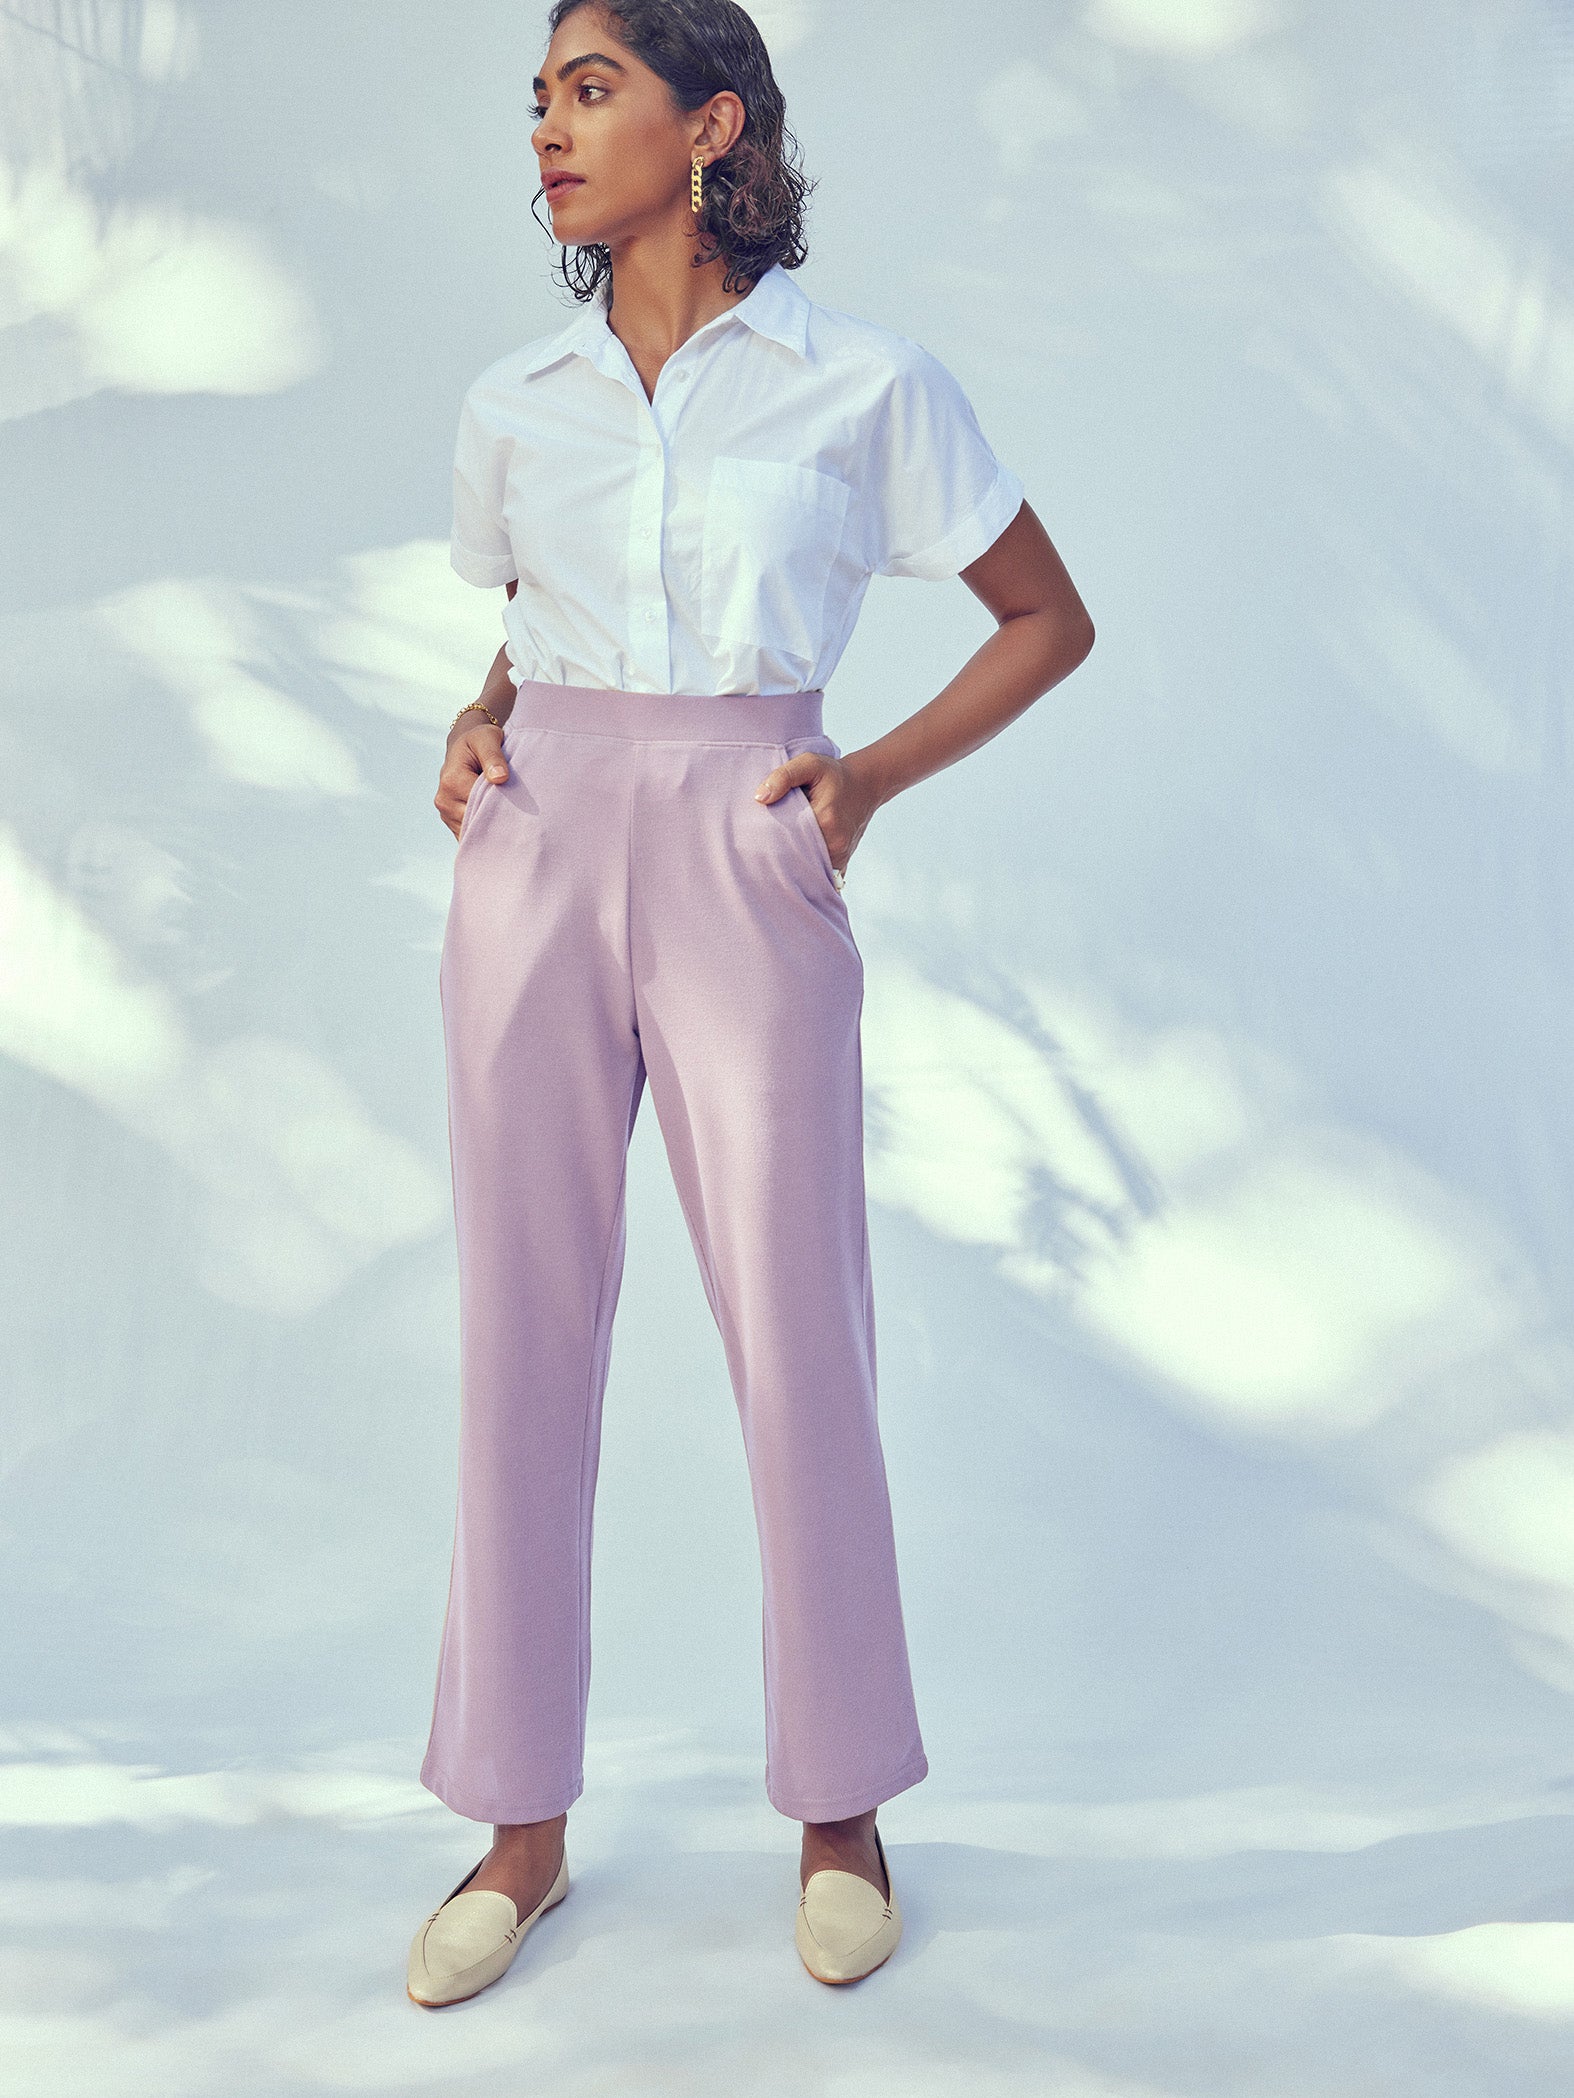 Lilac Knit High Waisted Pants  Buy Lilac Knit High Waisted Pants for Women  Online